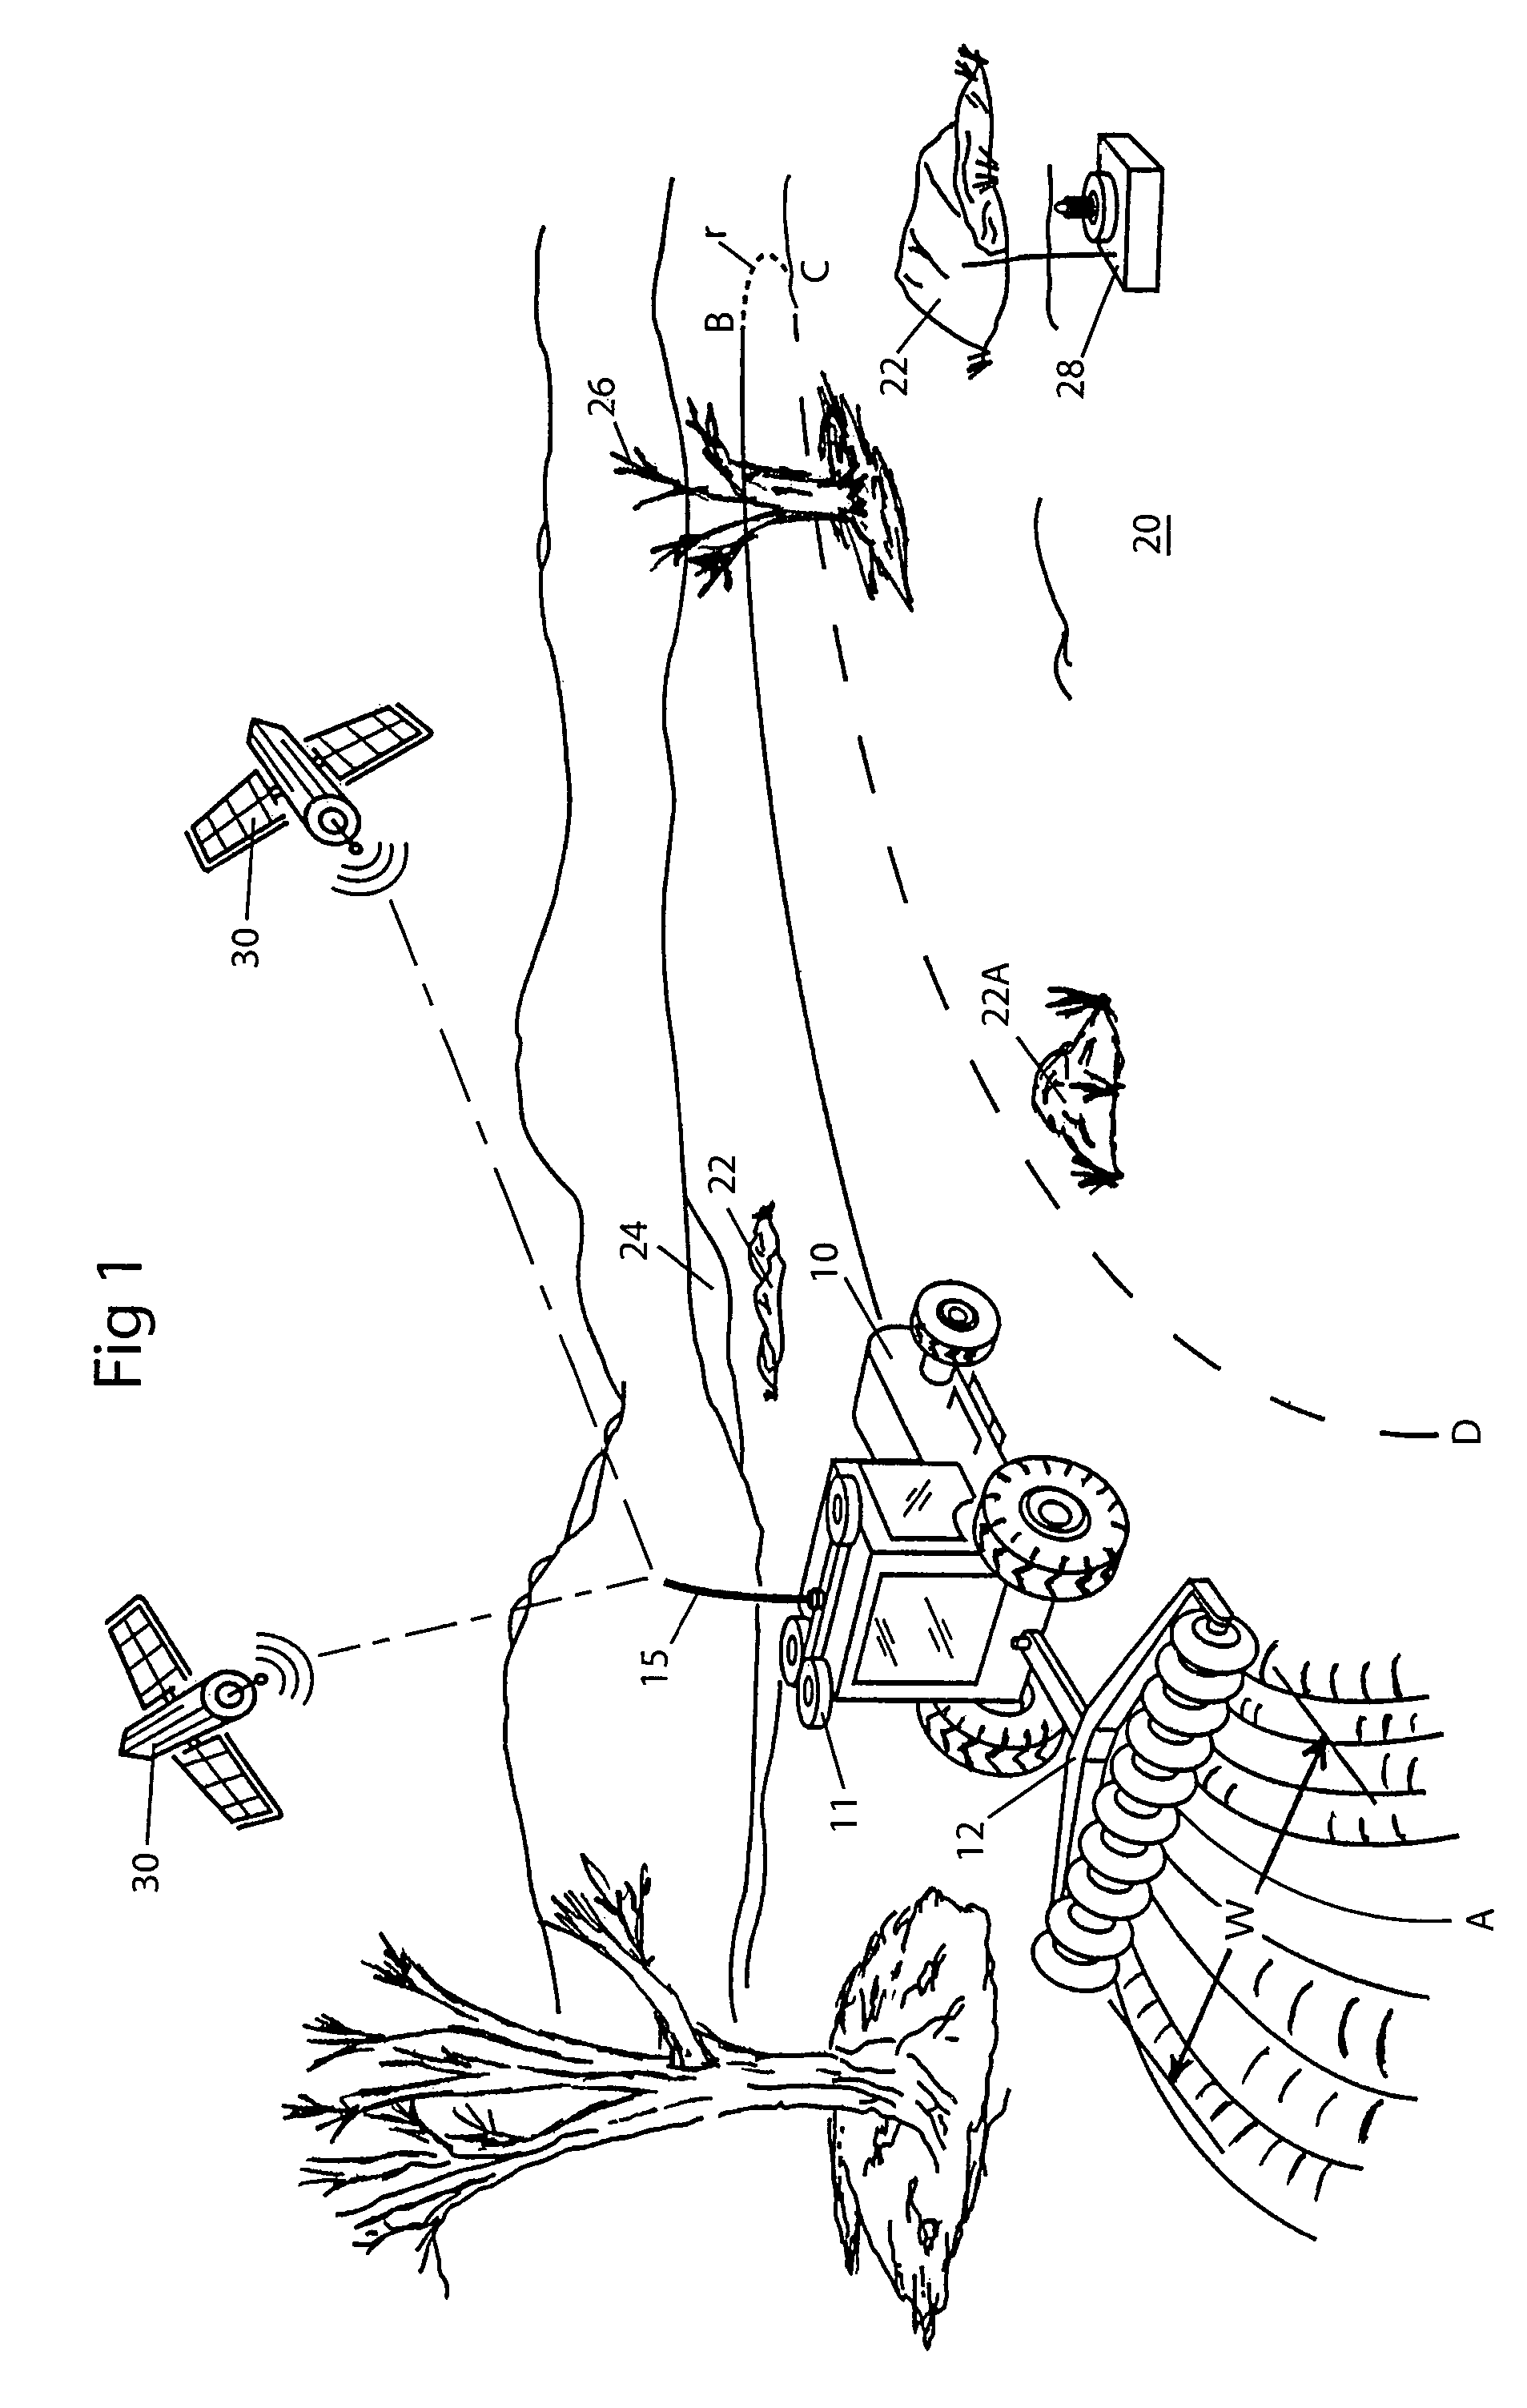 System and method for interactive selection and determination of agricultural vehicle guide paths offset from each other with varying curvature along their length